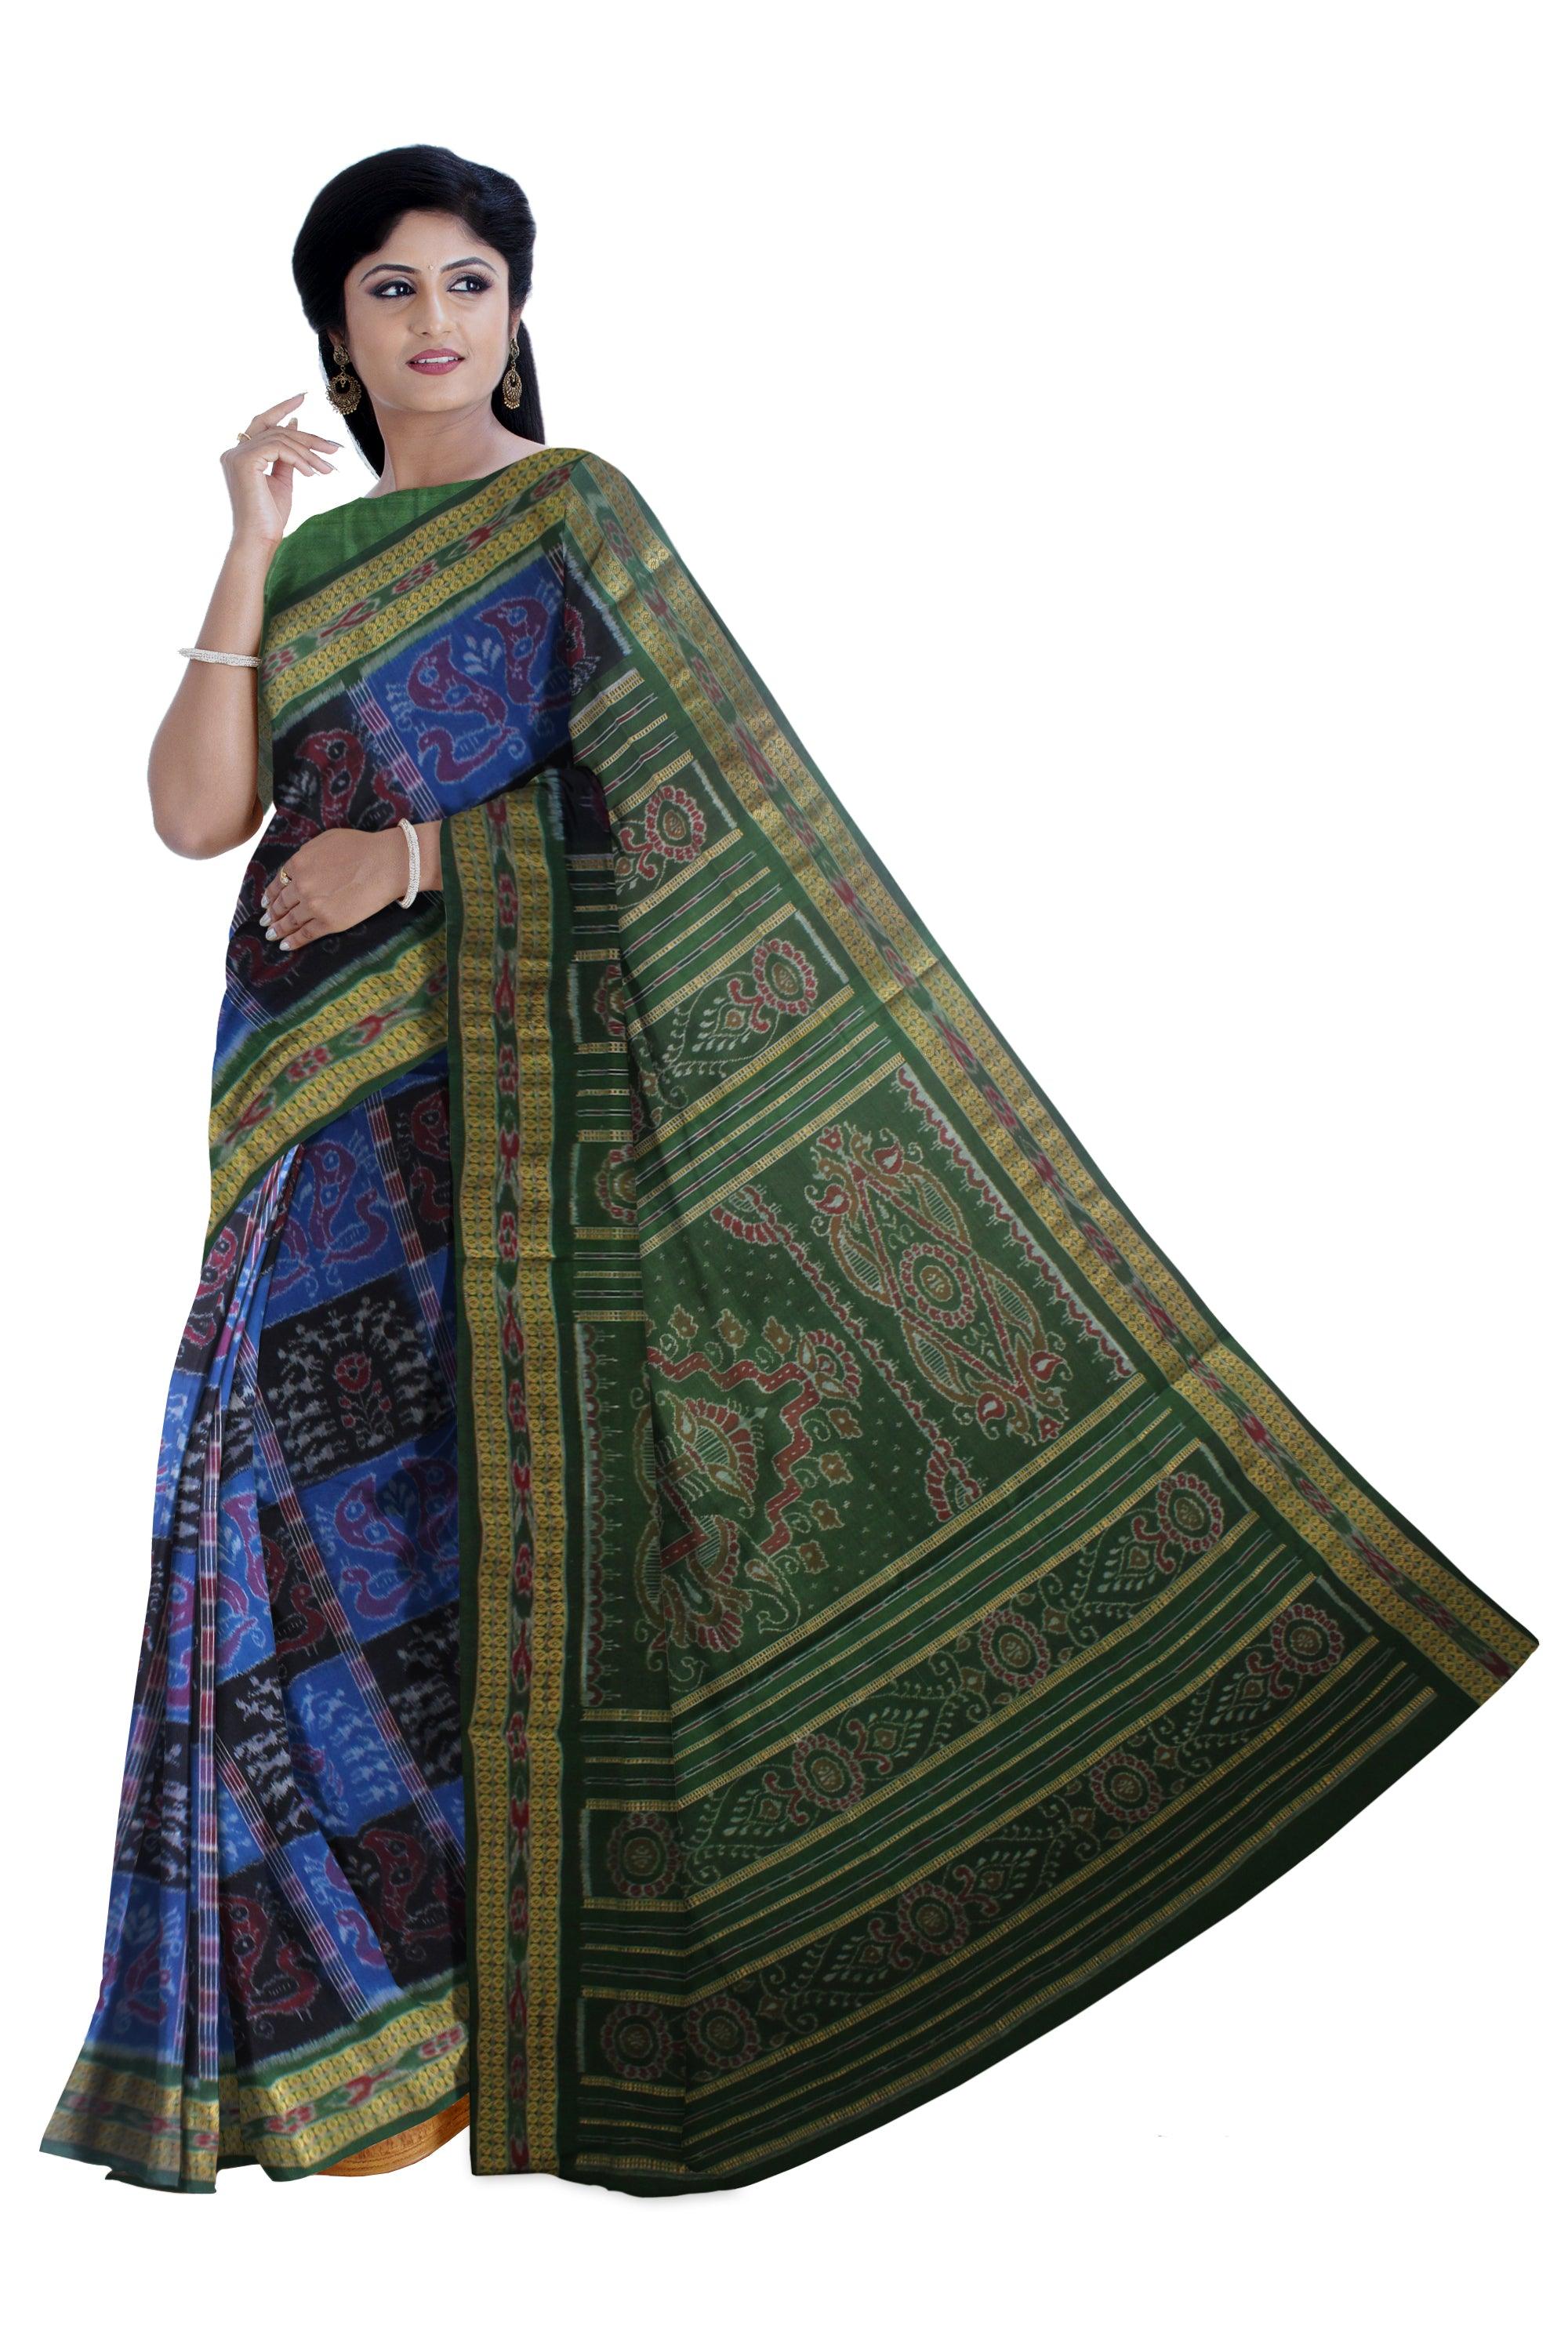 LATEST TERRACOTTA PEACOCK  DESIGN IN BLACK, BLUE AND GREEN COLOUR COTTON SAREE AVAILABLE WITH BLOUSE PIECE. - Koshali Arts & Crafts Enterprise